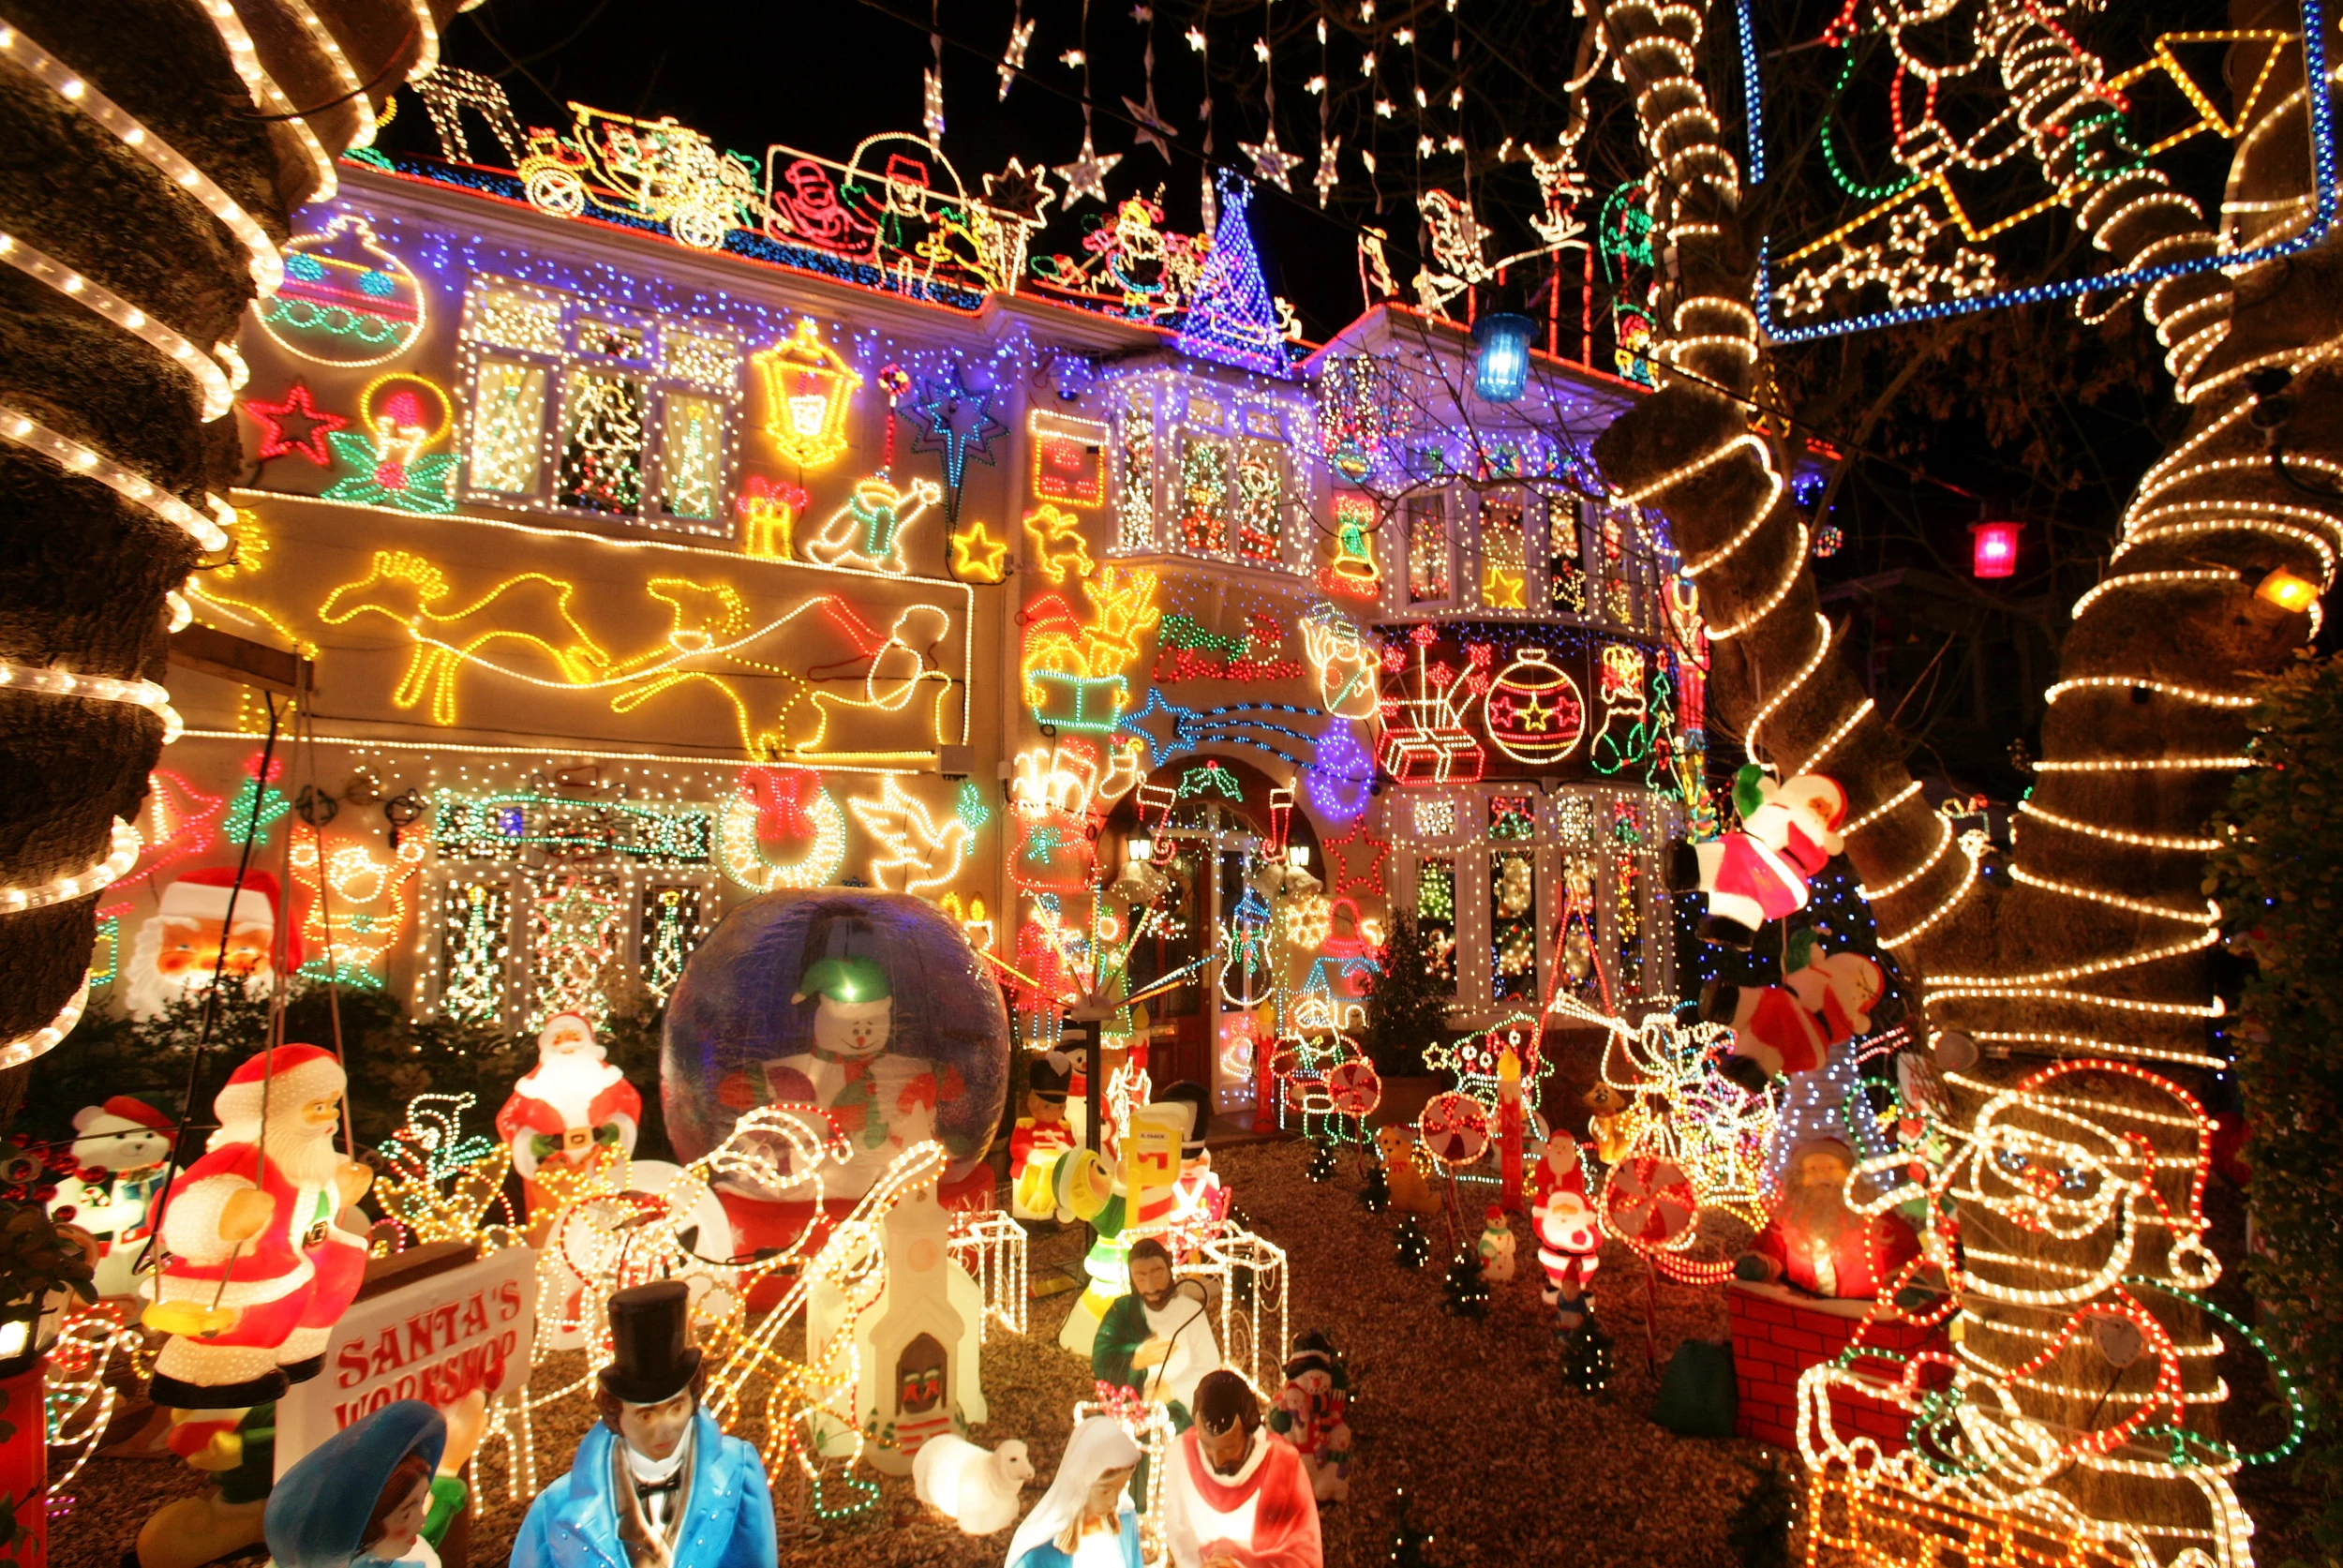 Resonate Elegance Født Your Idaho Christmas Lights Could Cost You $11,000 in Fines